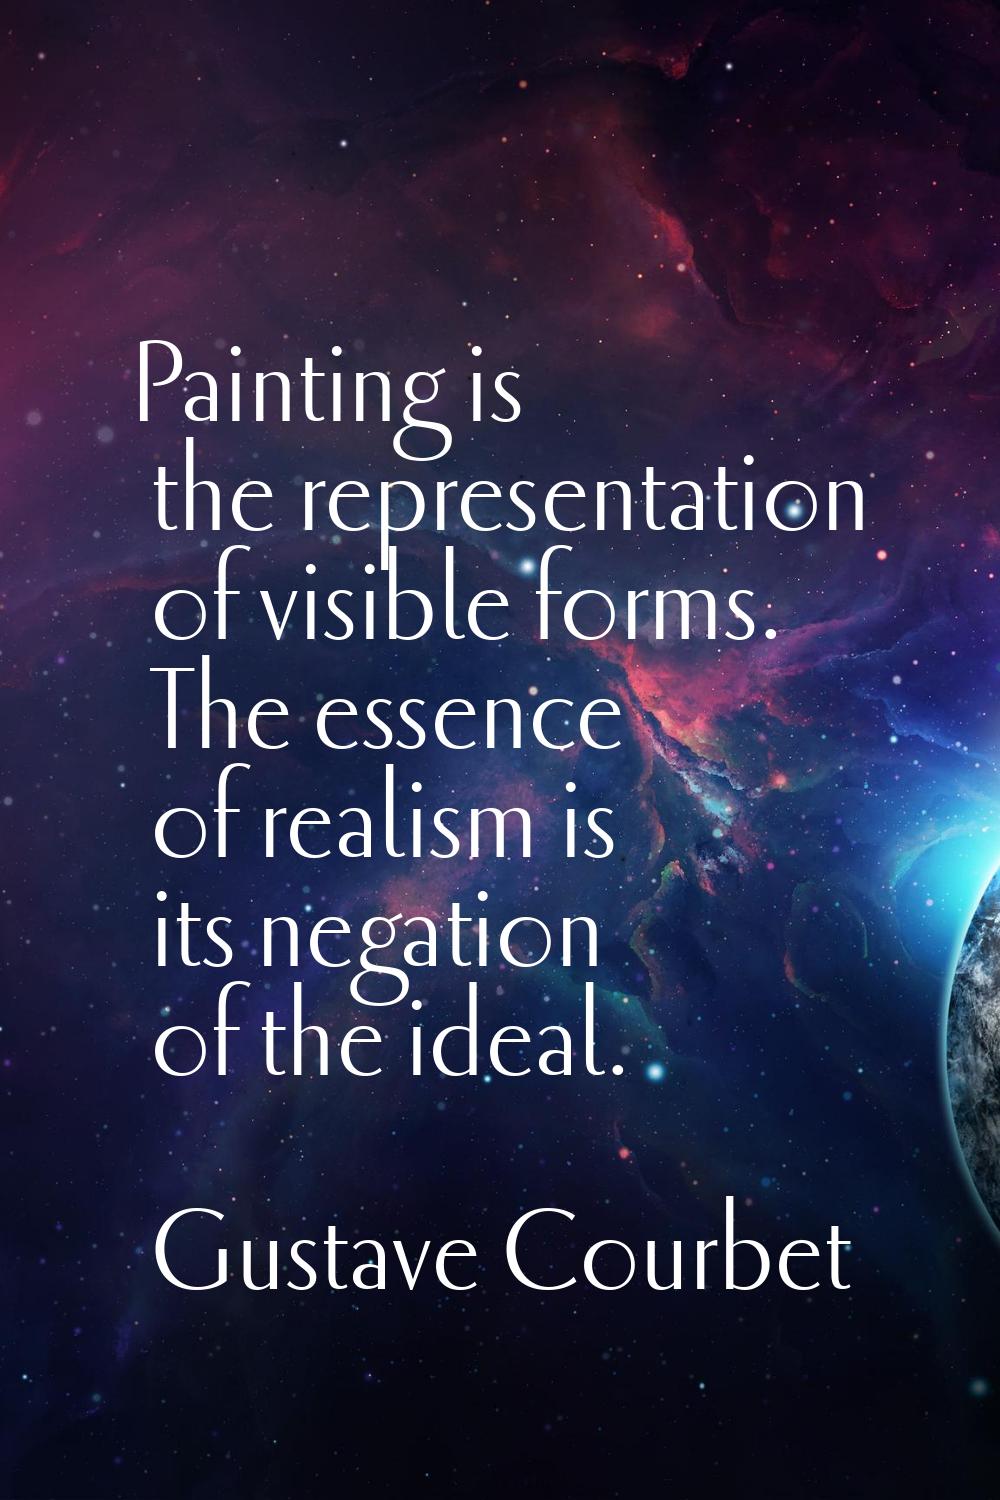 Painting is the representation of visible forms. The essence of realism is its negation of the idea